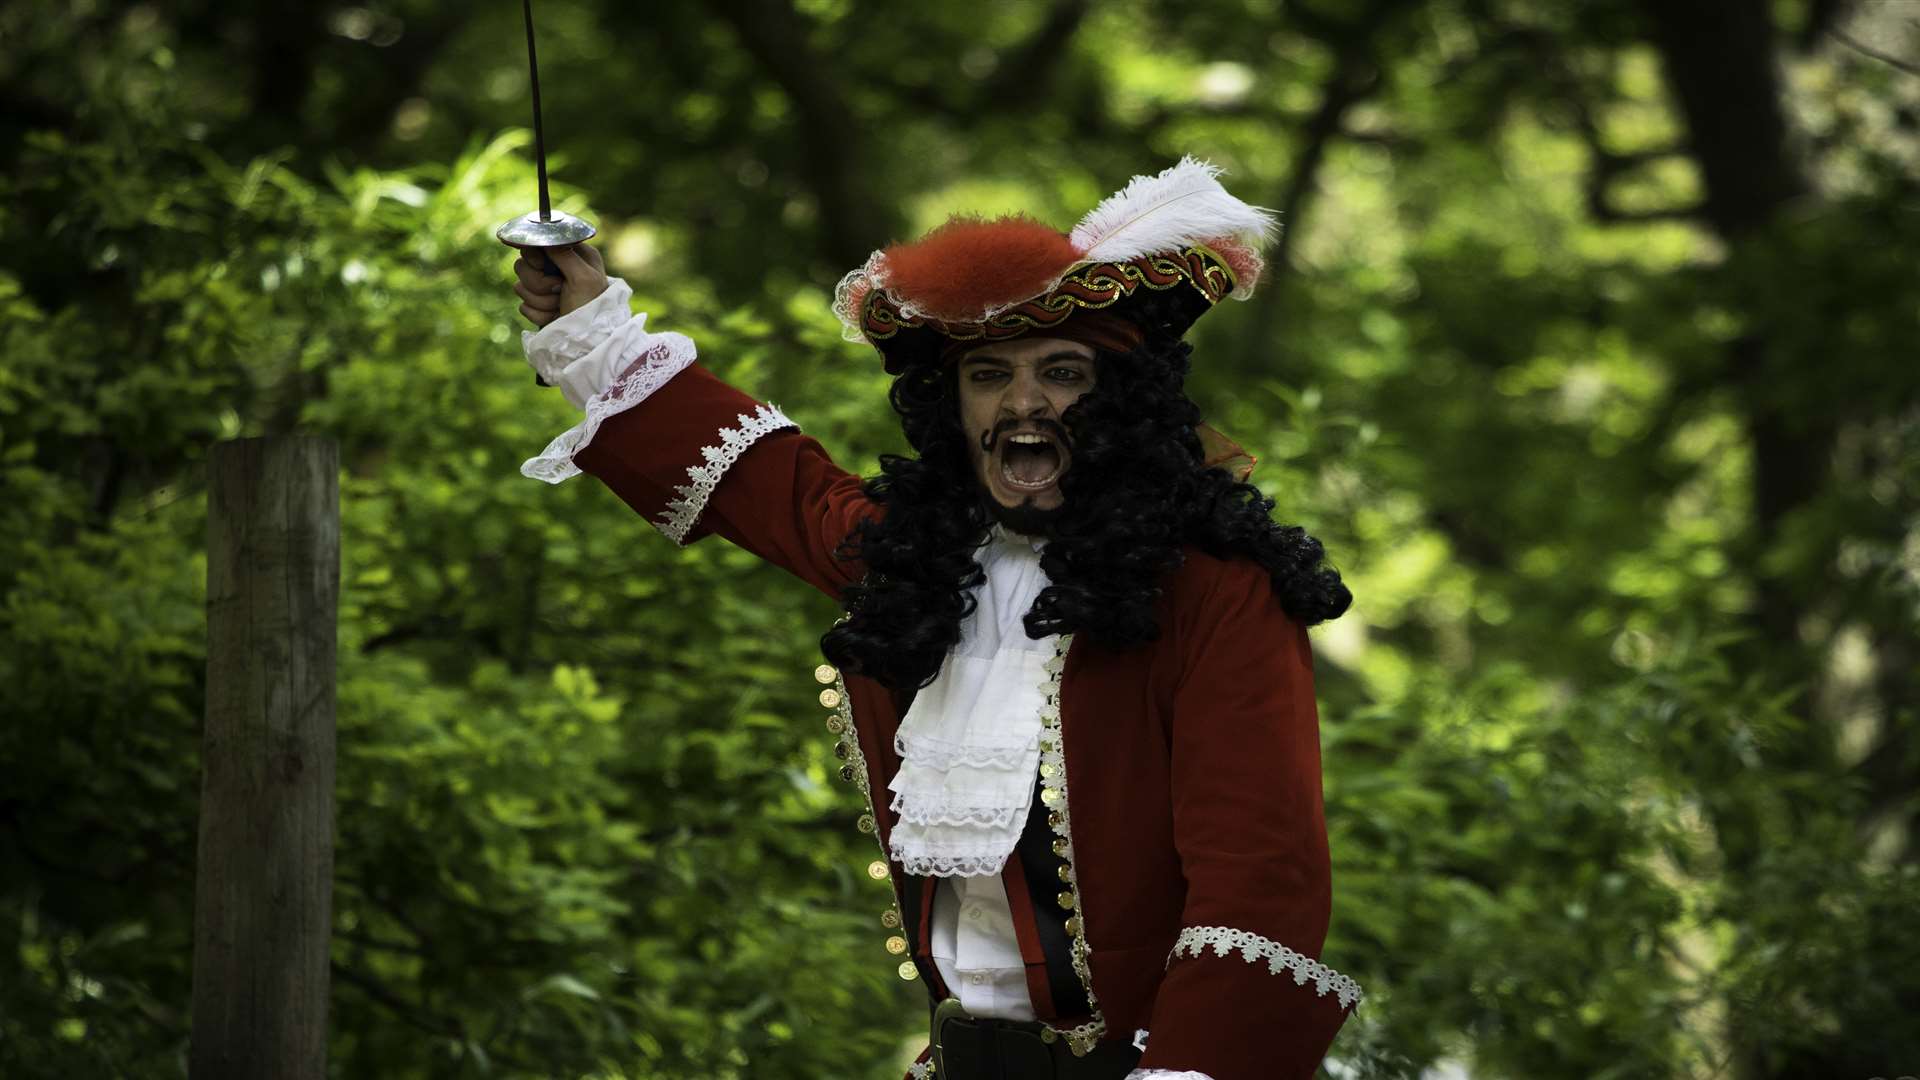 Captain Hook is one of the characters at Groombridge Place this summer Picture: Matt Salmon Photography